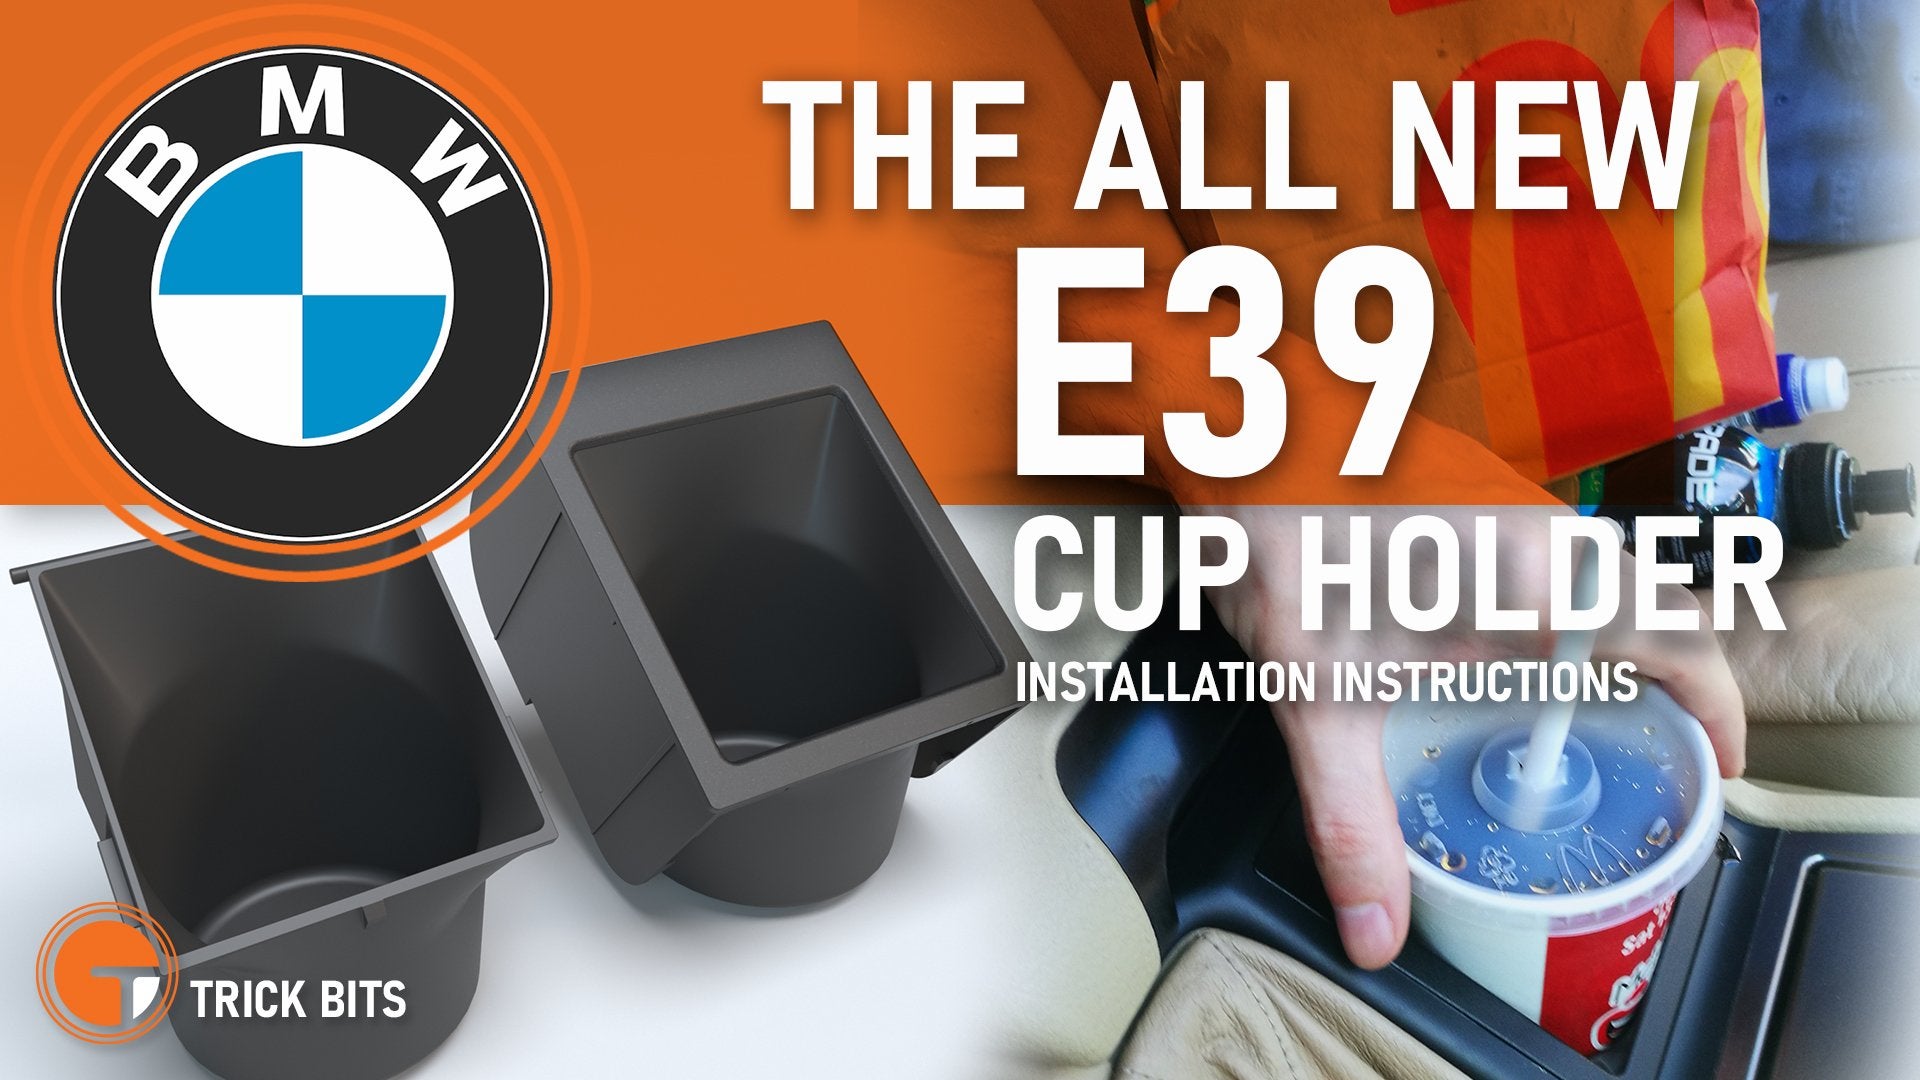 Introducing The NEW E39 center console Cup Holder